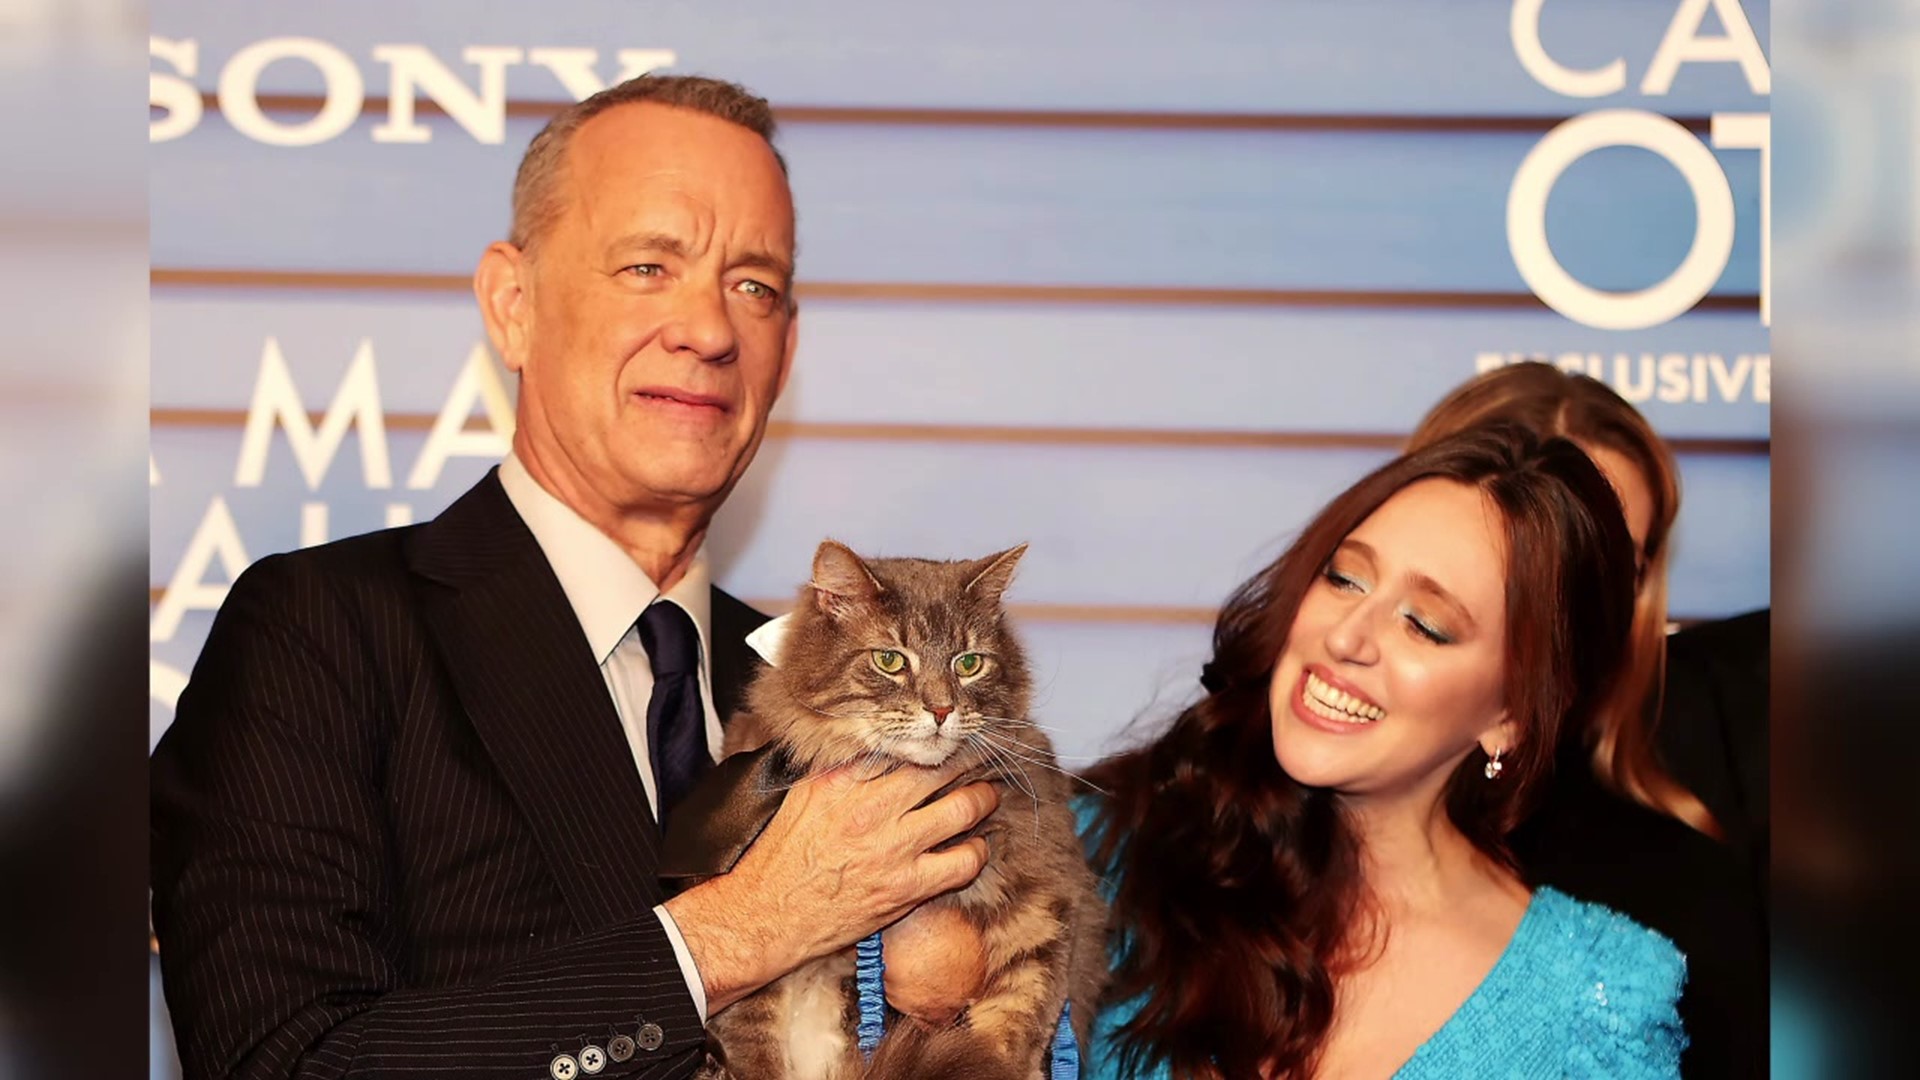 Schmagel the cat stars in the new Tom Hanks movie "A Man Called Otto." Nikki Krize caught up with the famous feline and his owner.